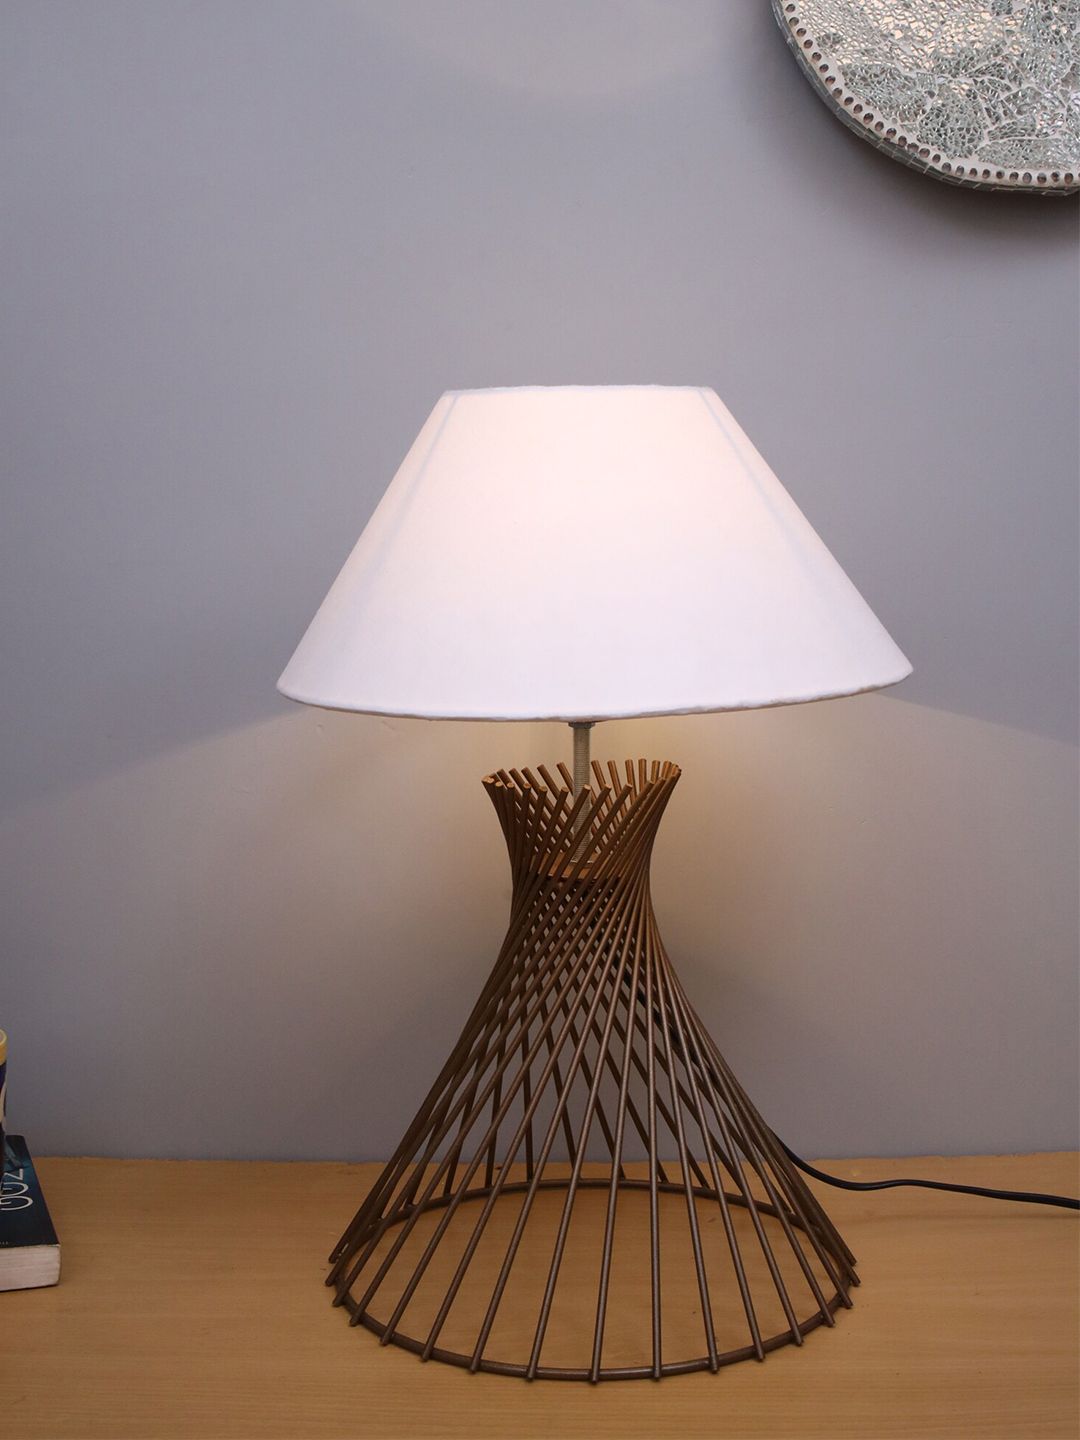 Homesake White & Gold-Toned Self Design Contemporary Bedside Standard Lamp with Shade Price in India